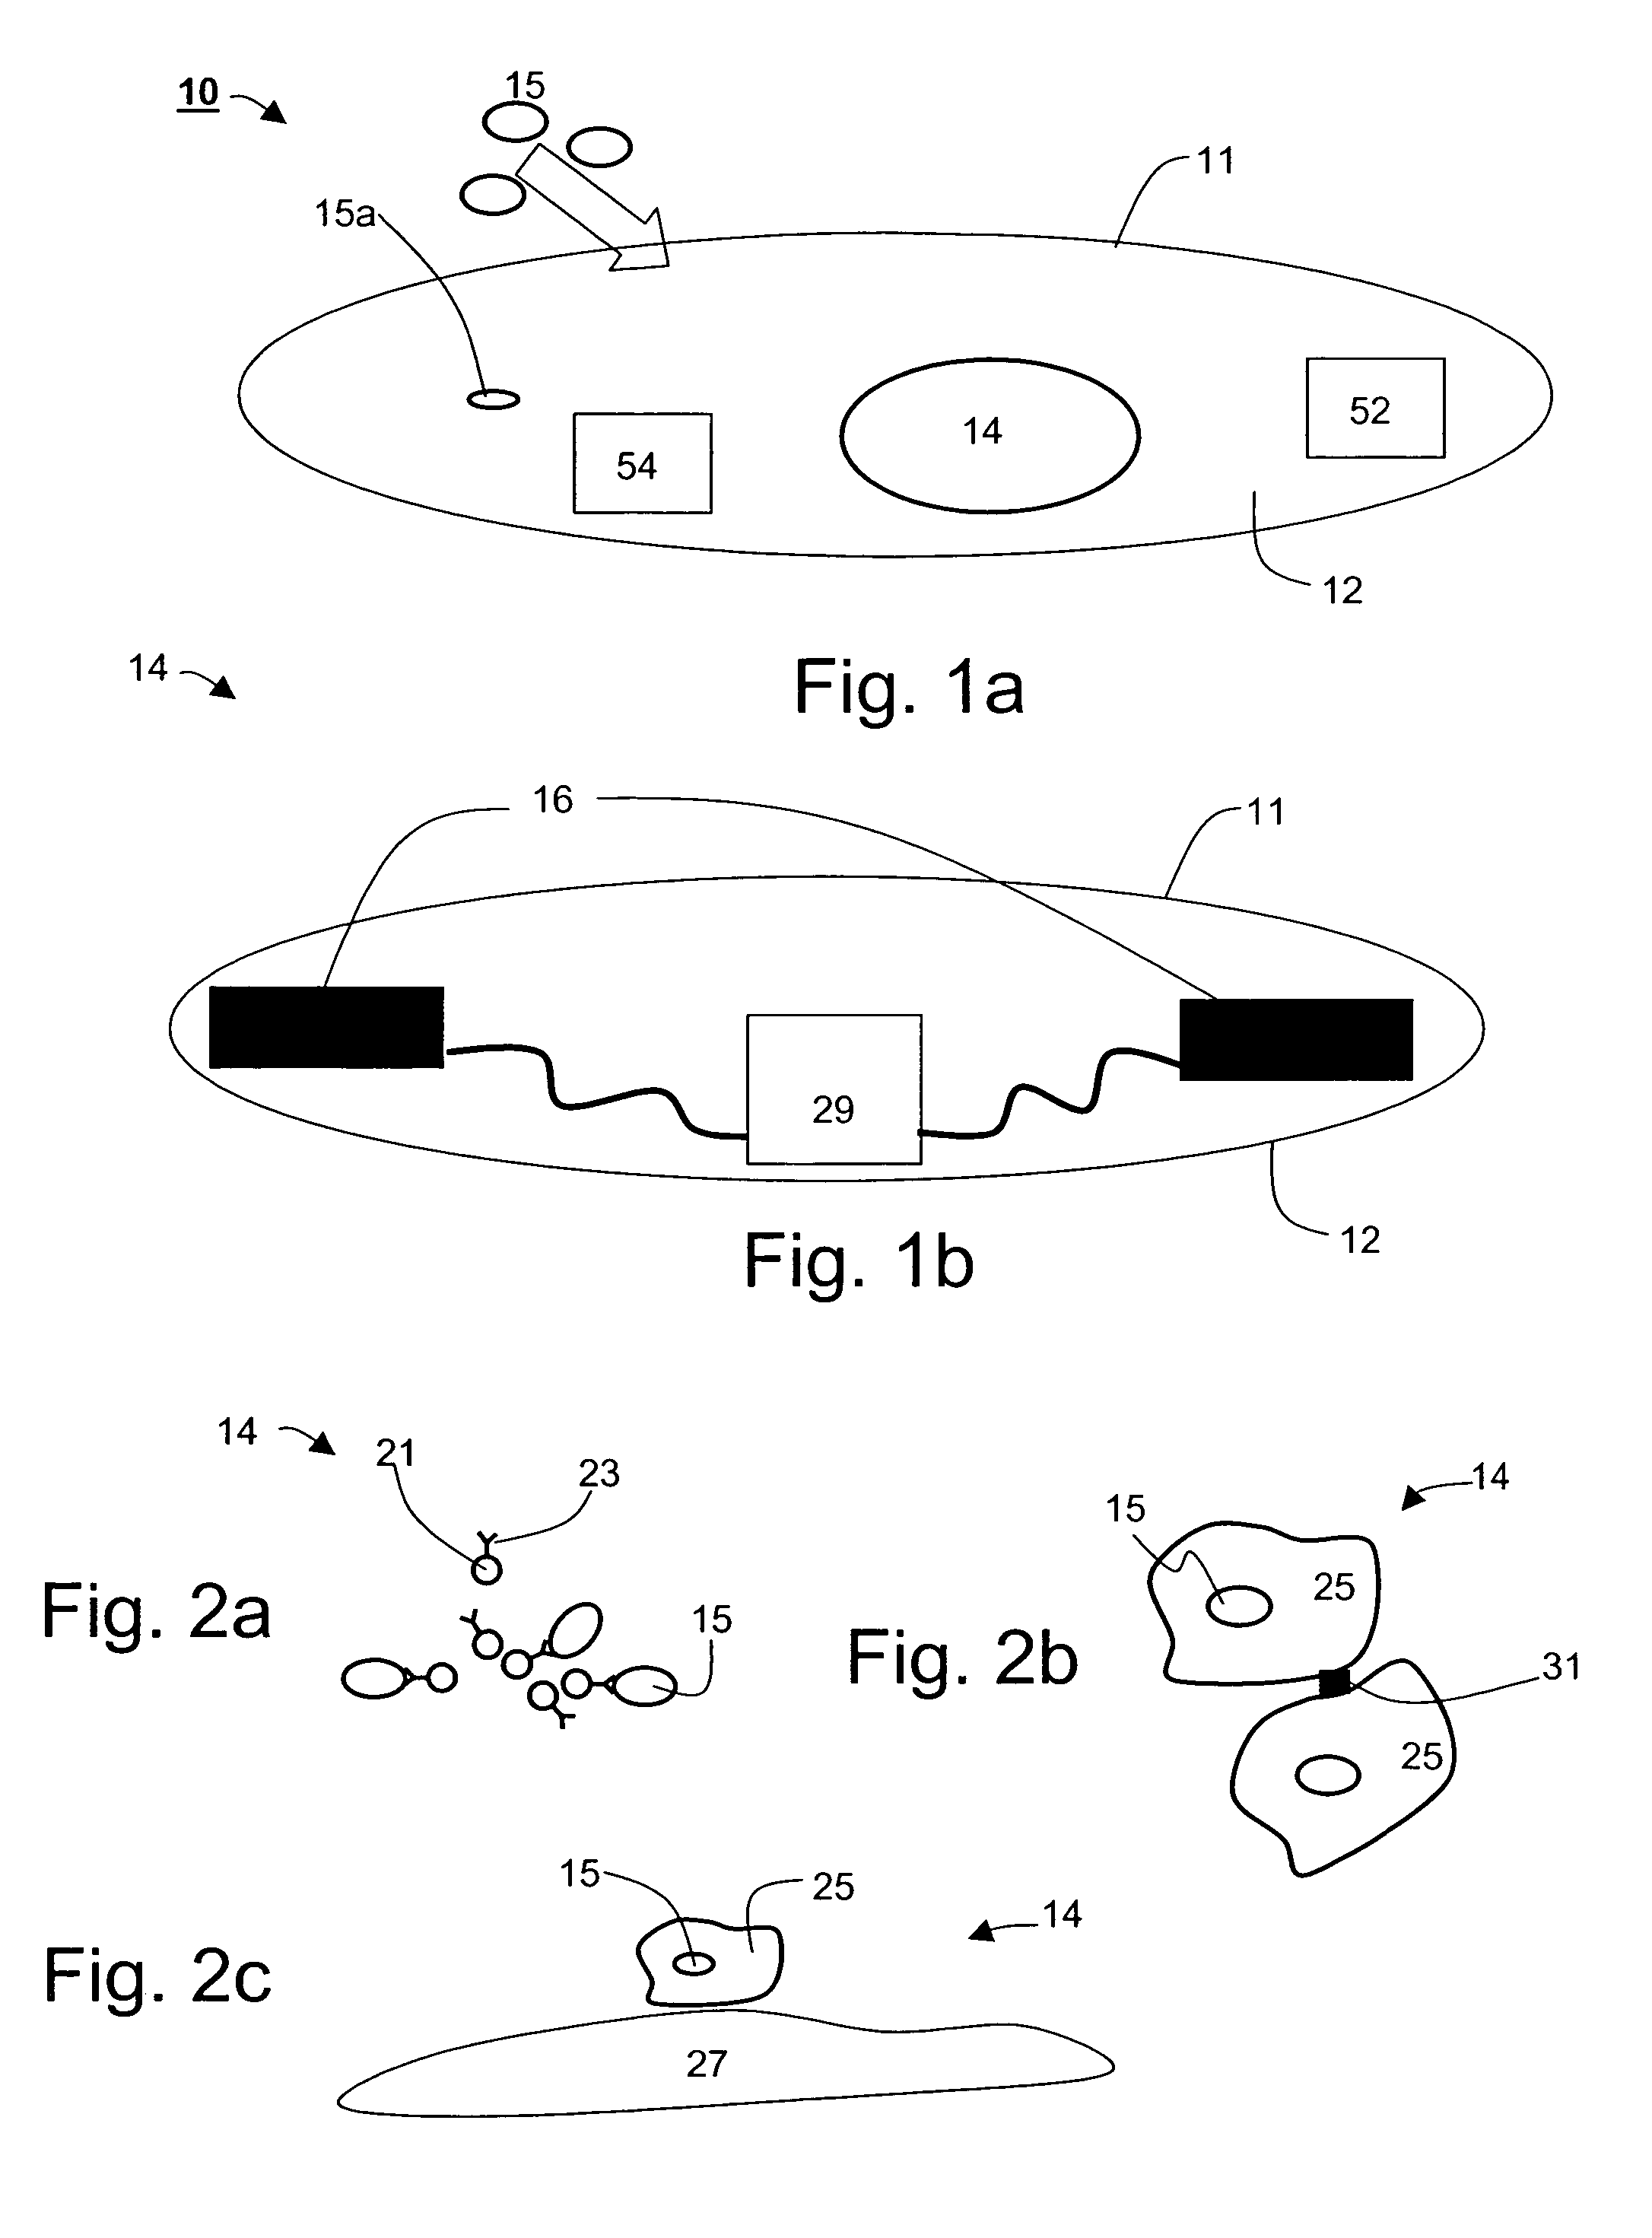 Ingestible gastrointestinal device